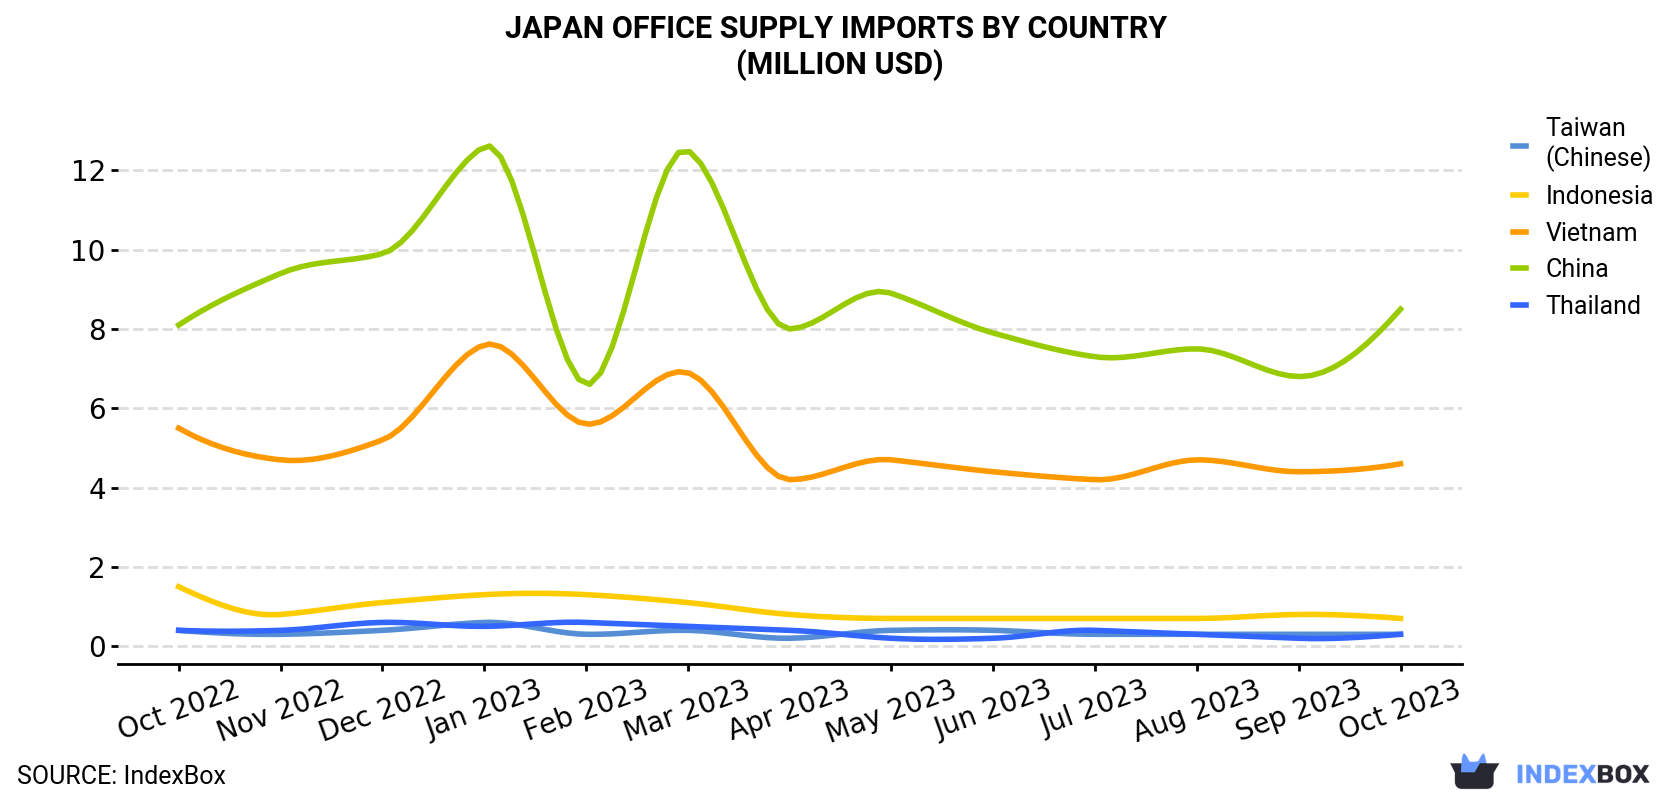 Japan Office Supply Imports By Country (Million USD)